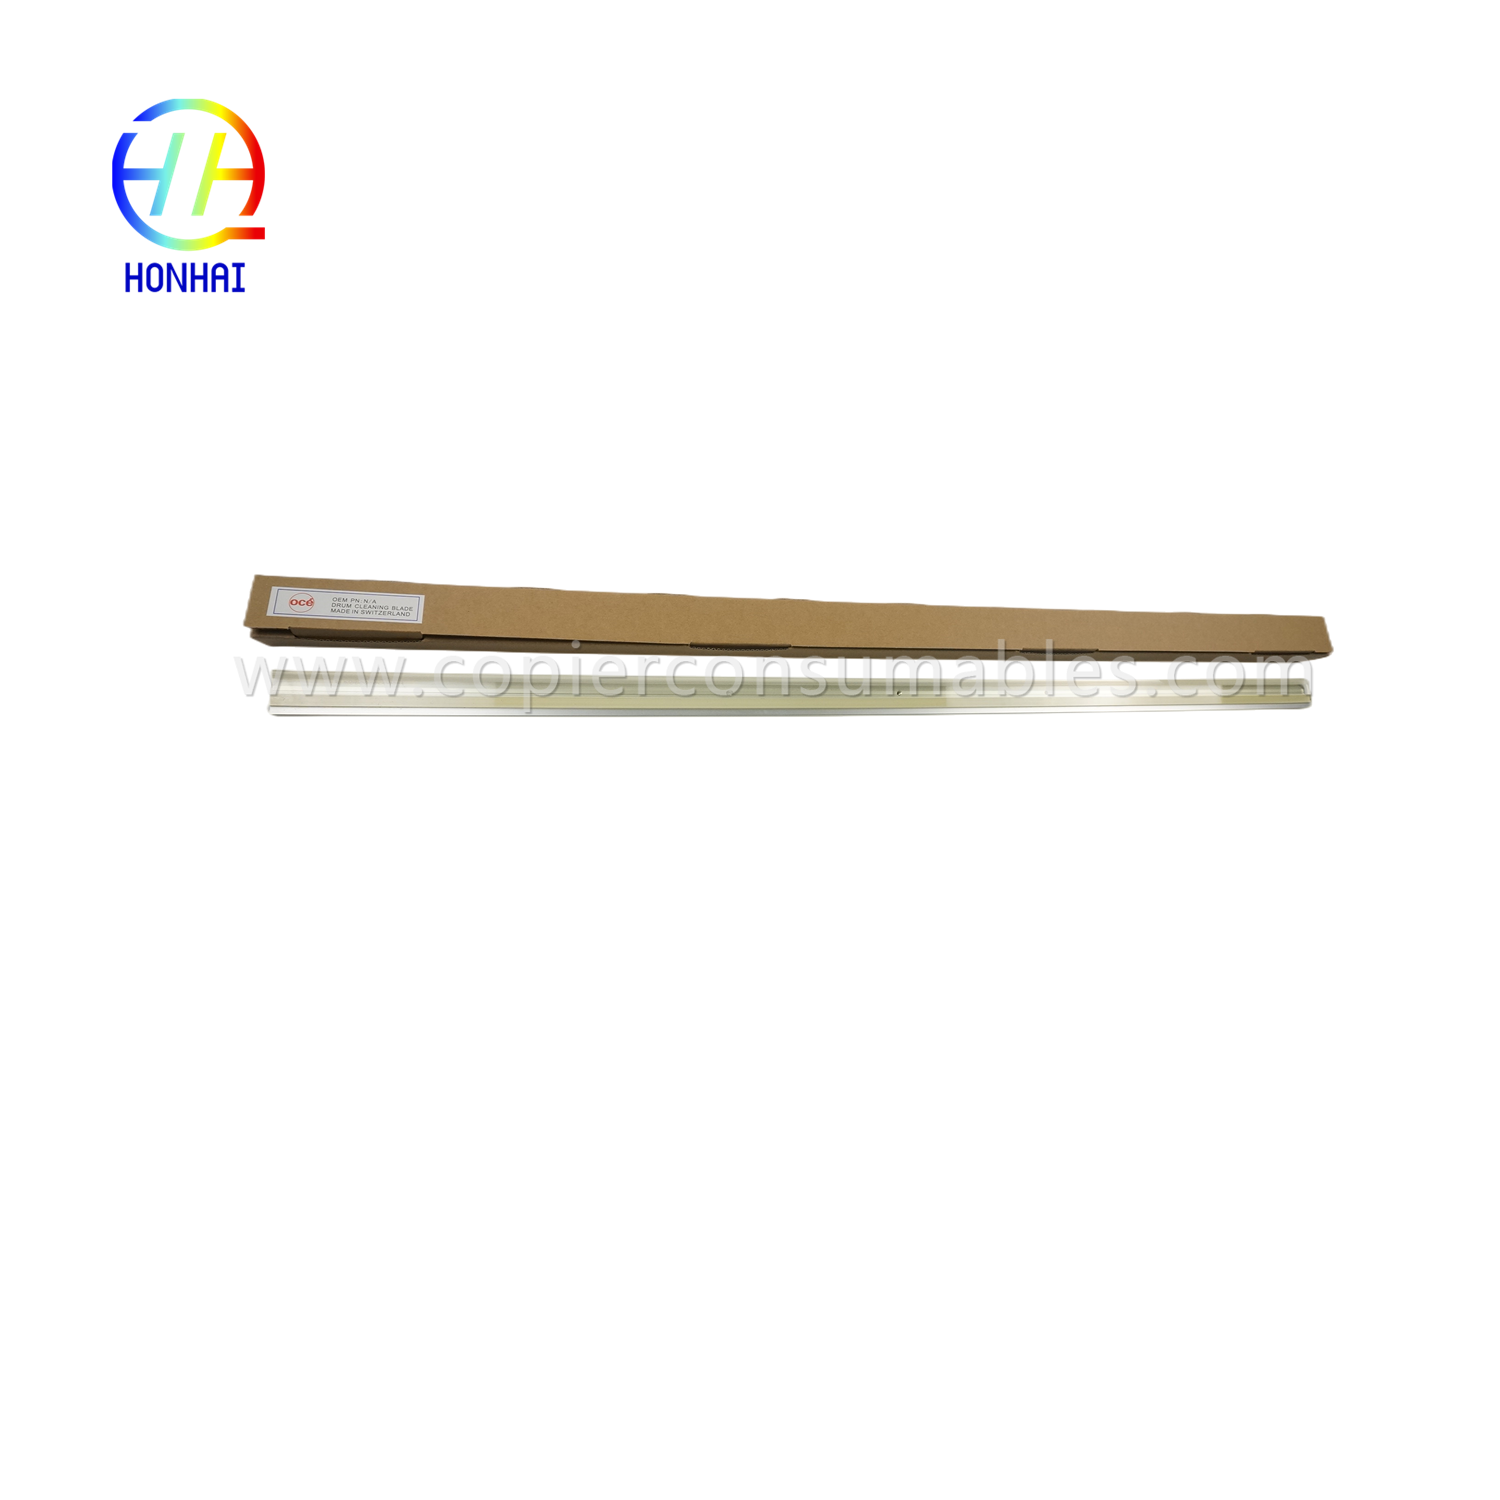 Cleaning Blade for Oce 9300 9400 9600 TDS300 400 600 700 Pw300 340 360 365 (PN. 2912651) (1)